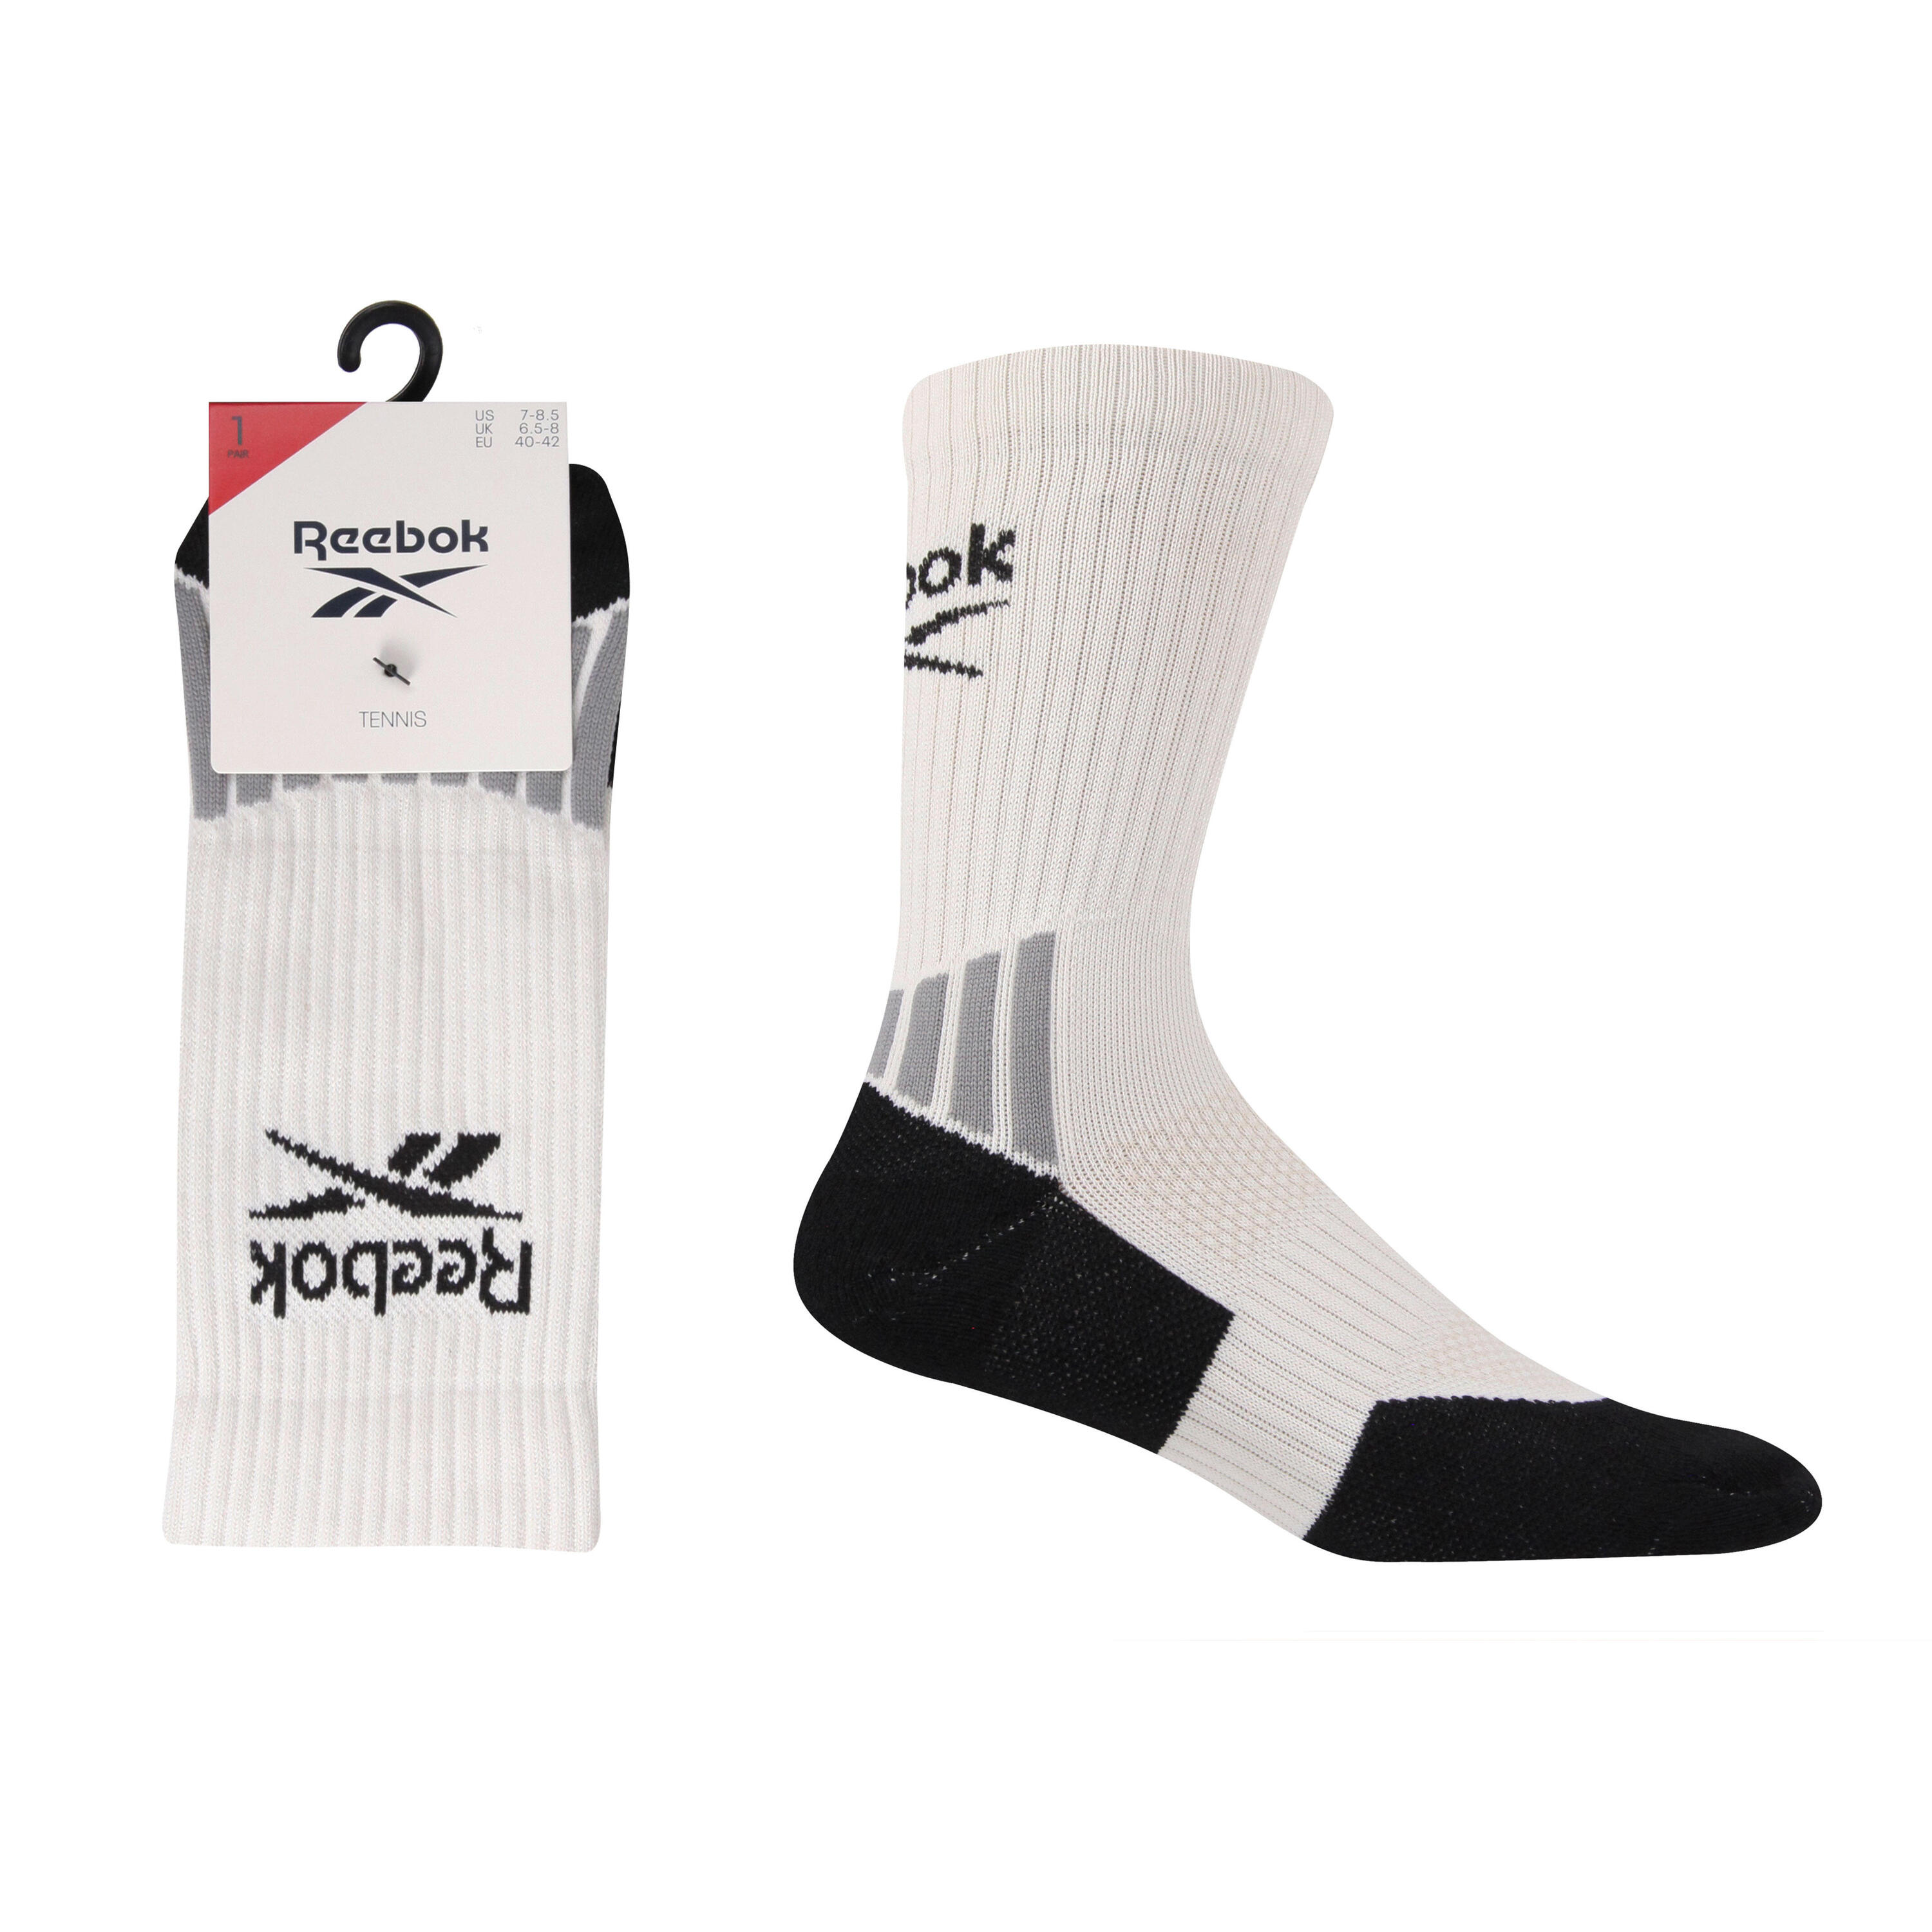 REEBOK 1 Pack Tennis Socks With Full Elastic Compession, Ankle and Arch Support